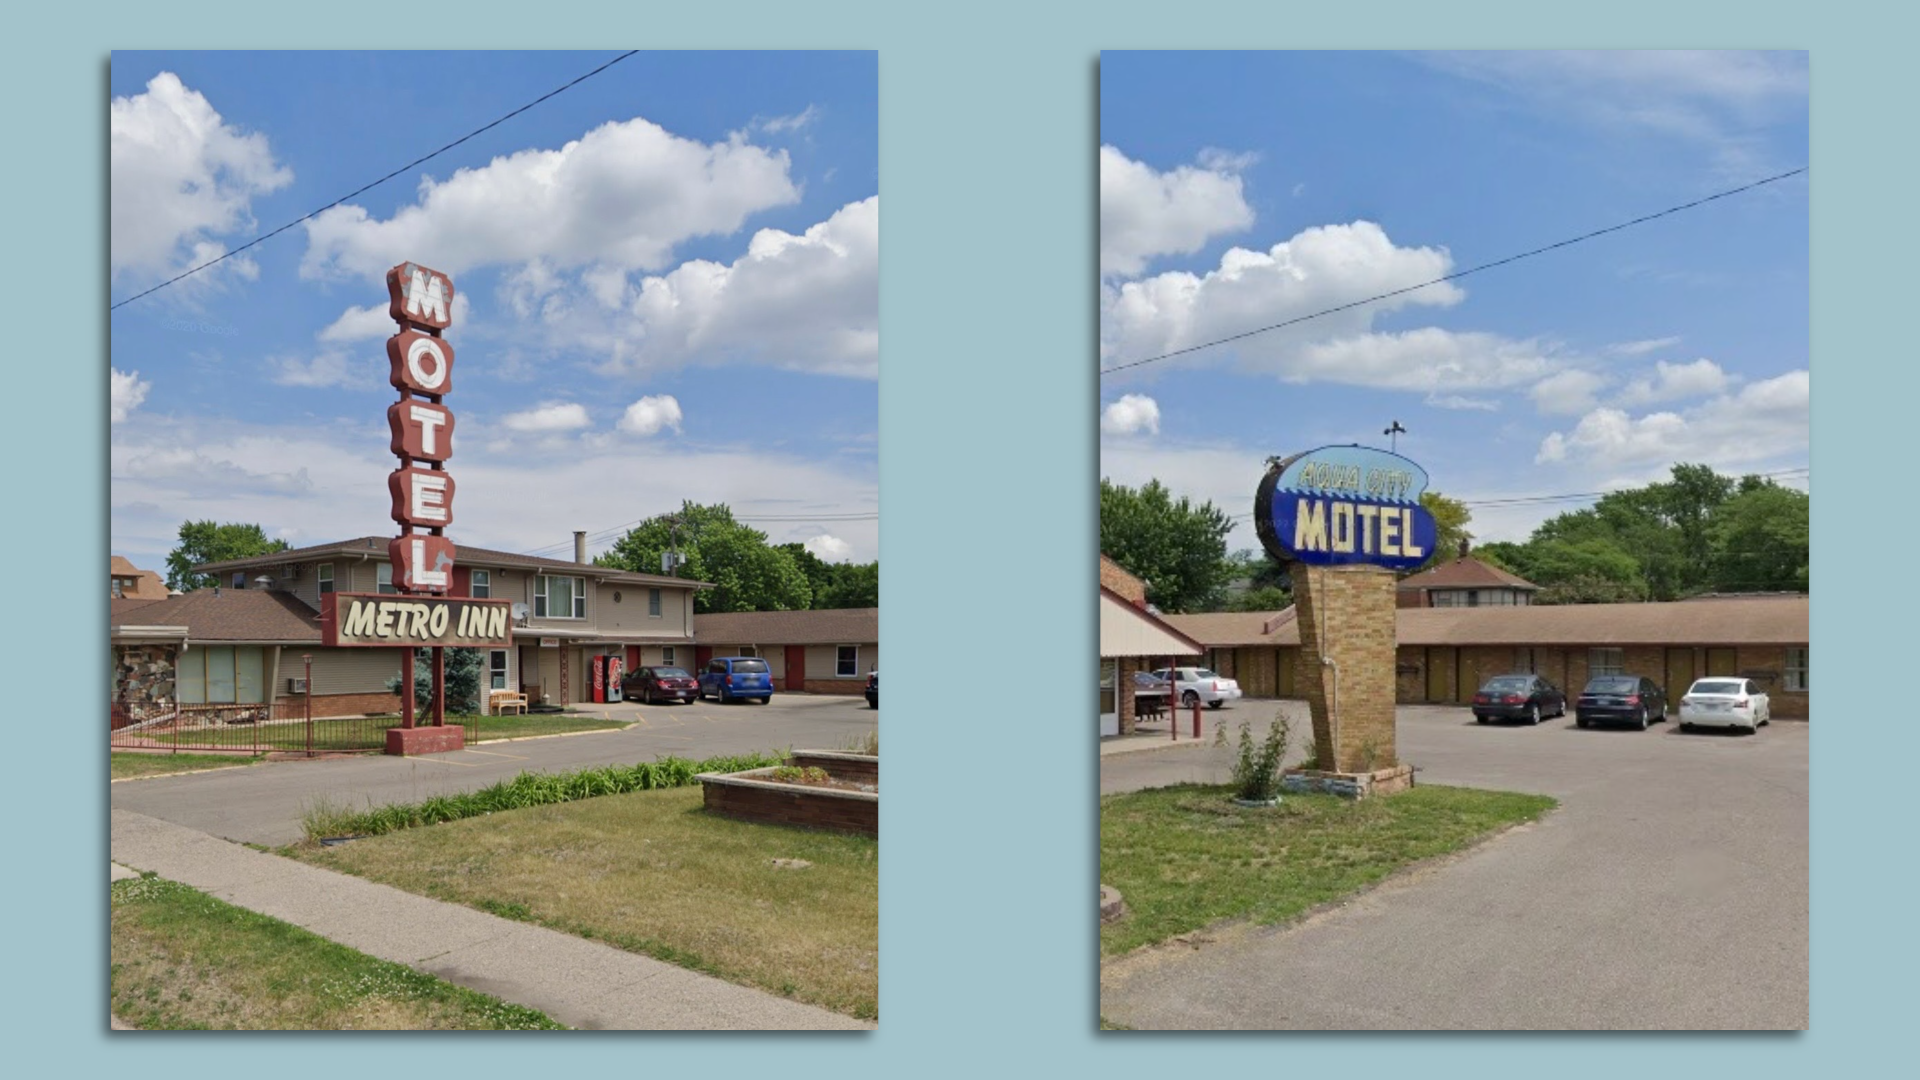 Two images of motel signs. One reads Motel, the other reads Aqua City Motel